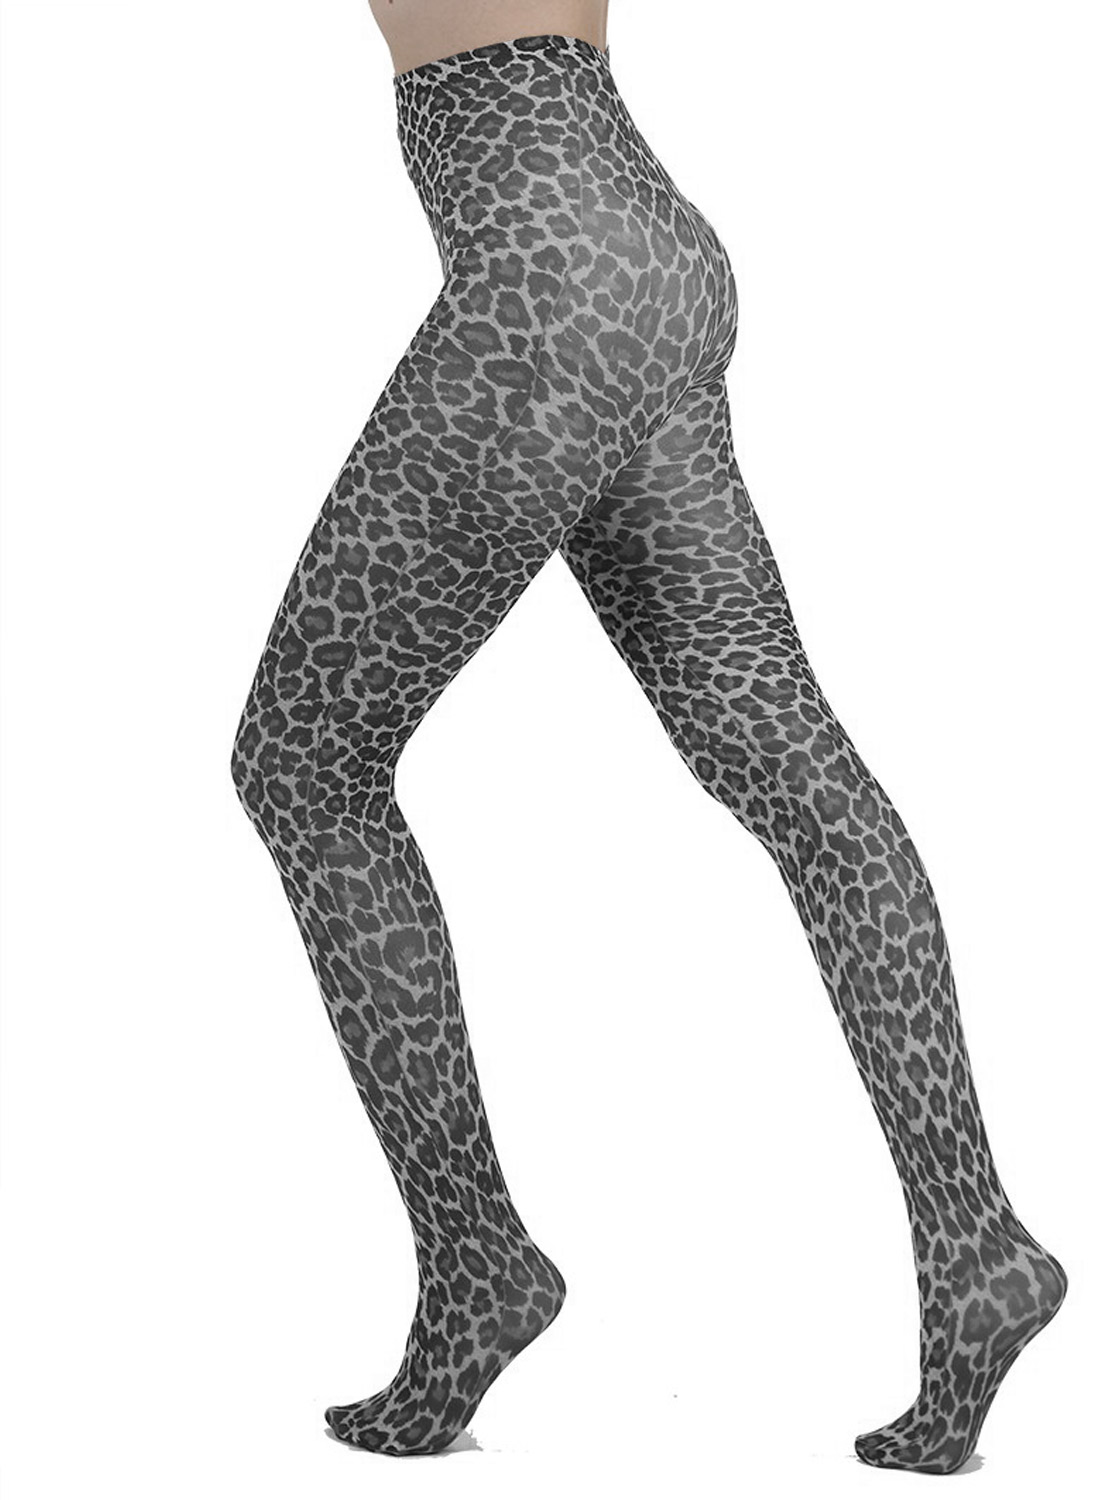 Leopard Printed Tights White